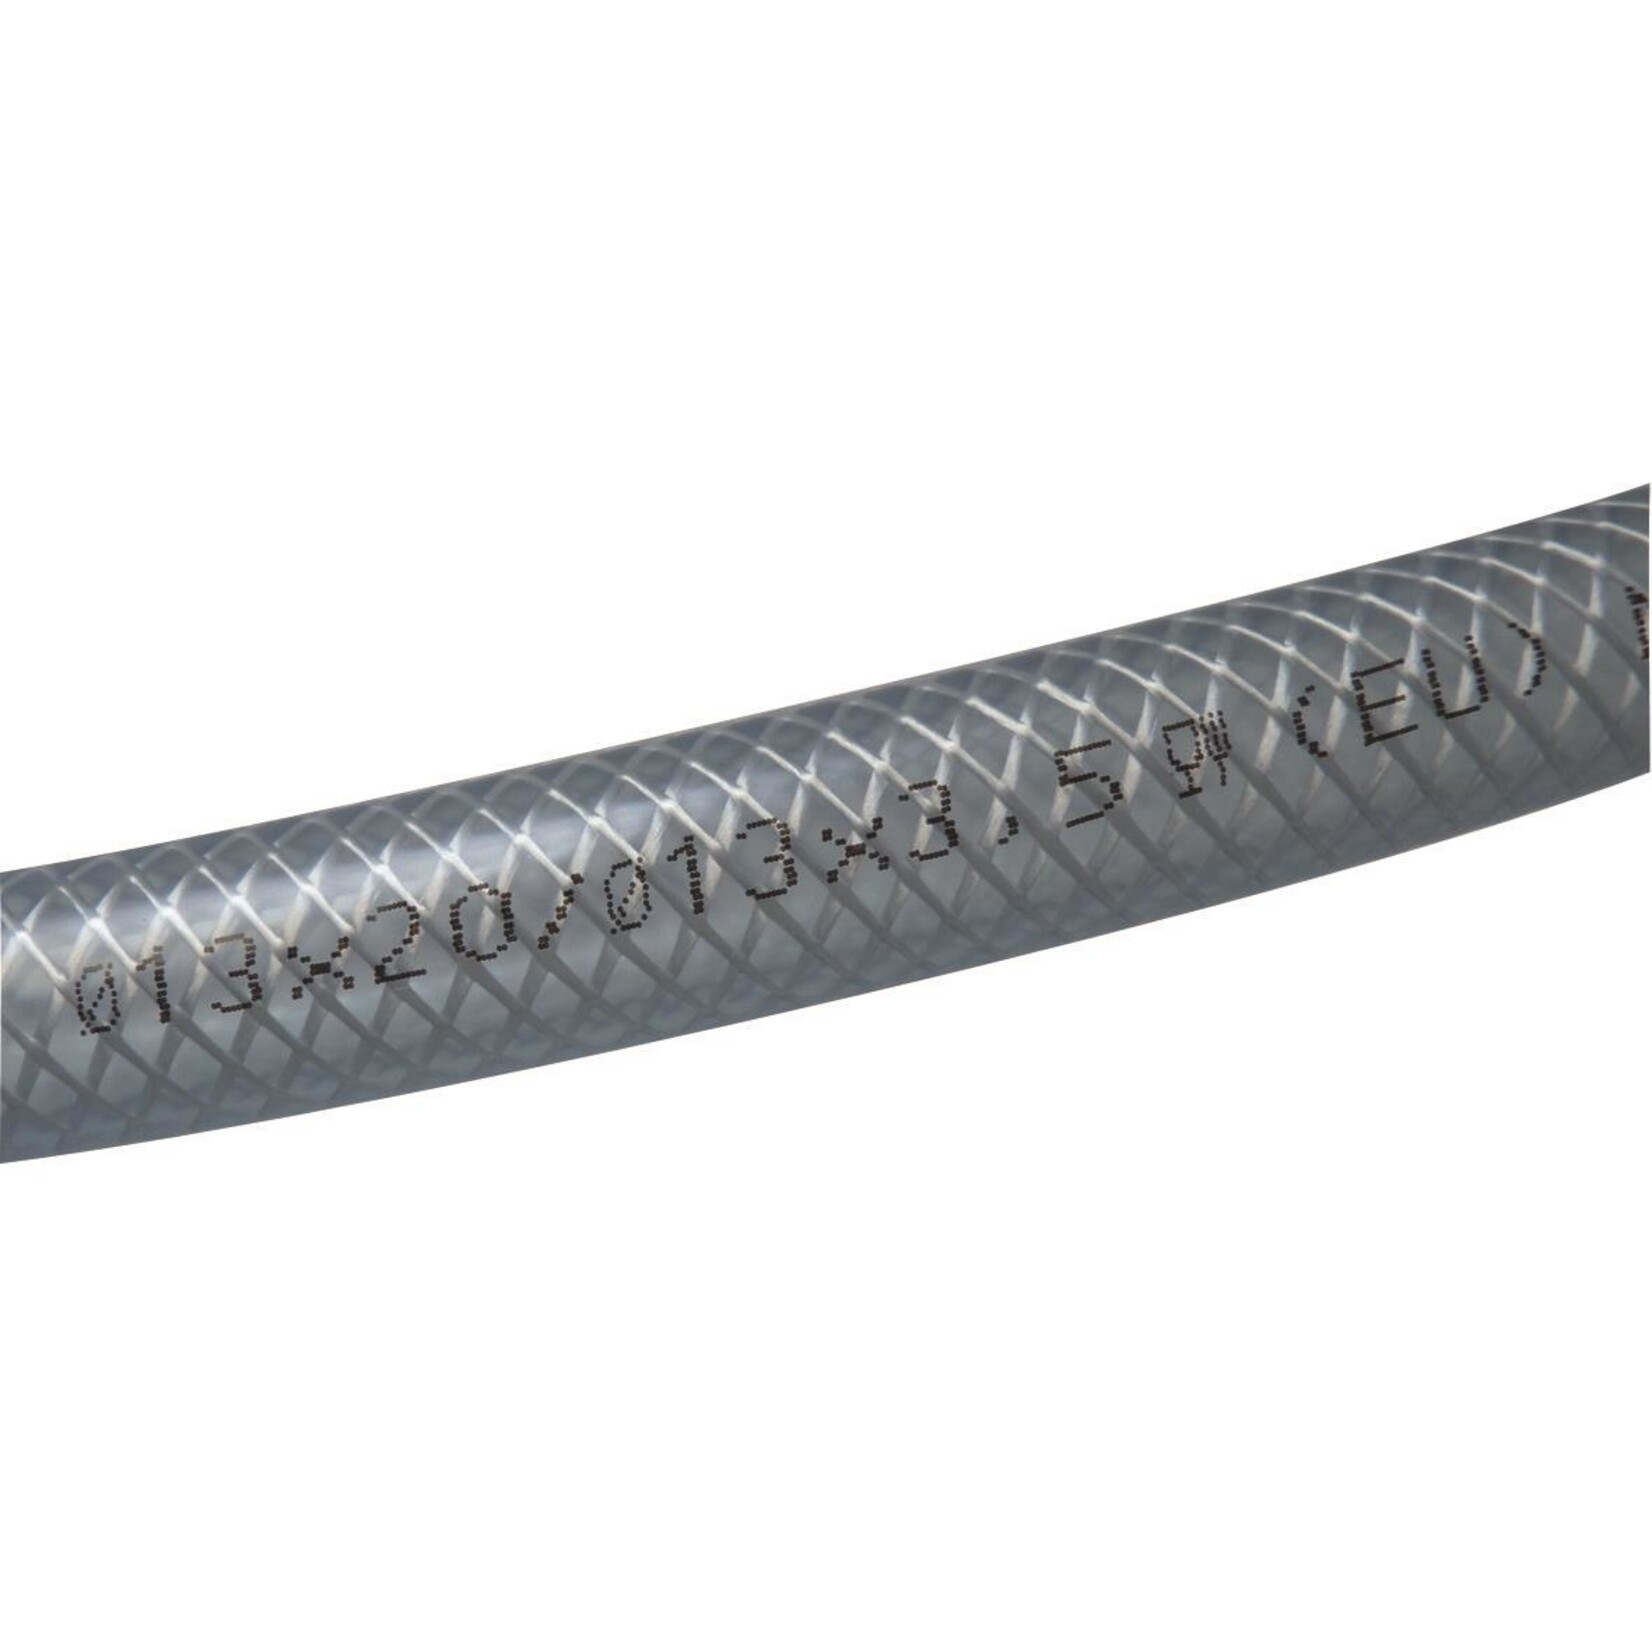 Plastimo Reinforced 25m clear pipe 8mm